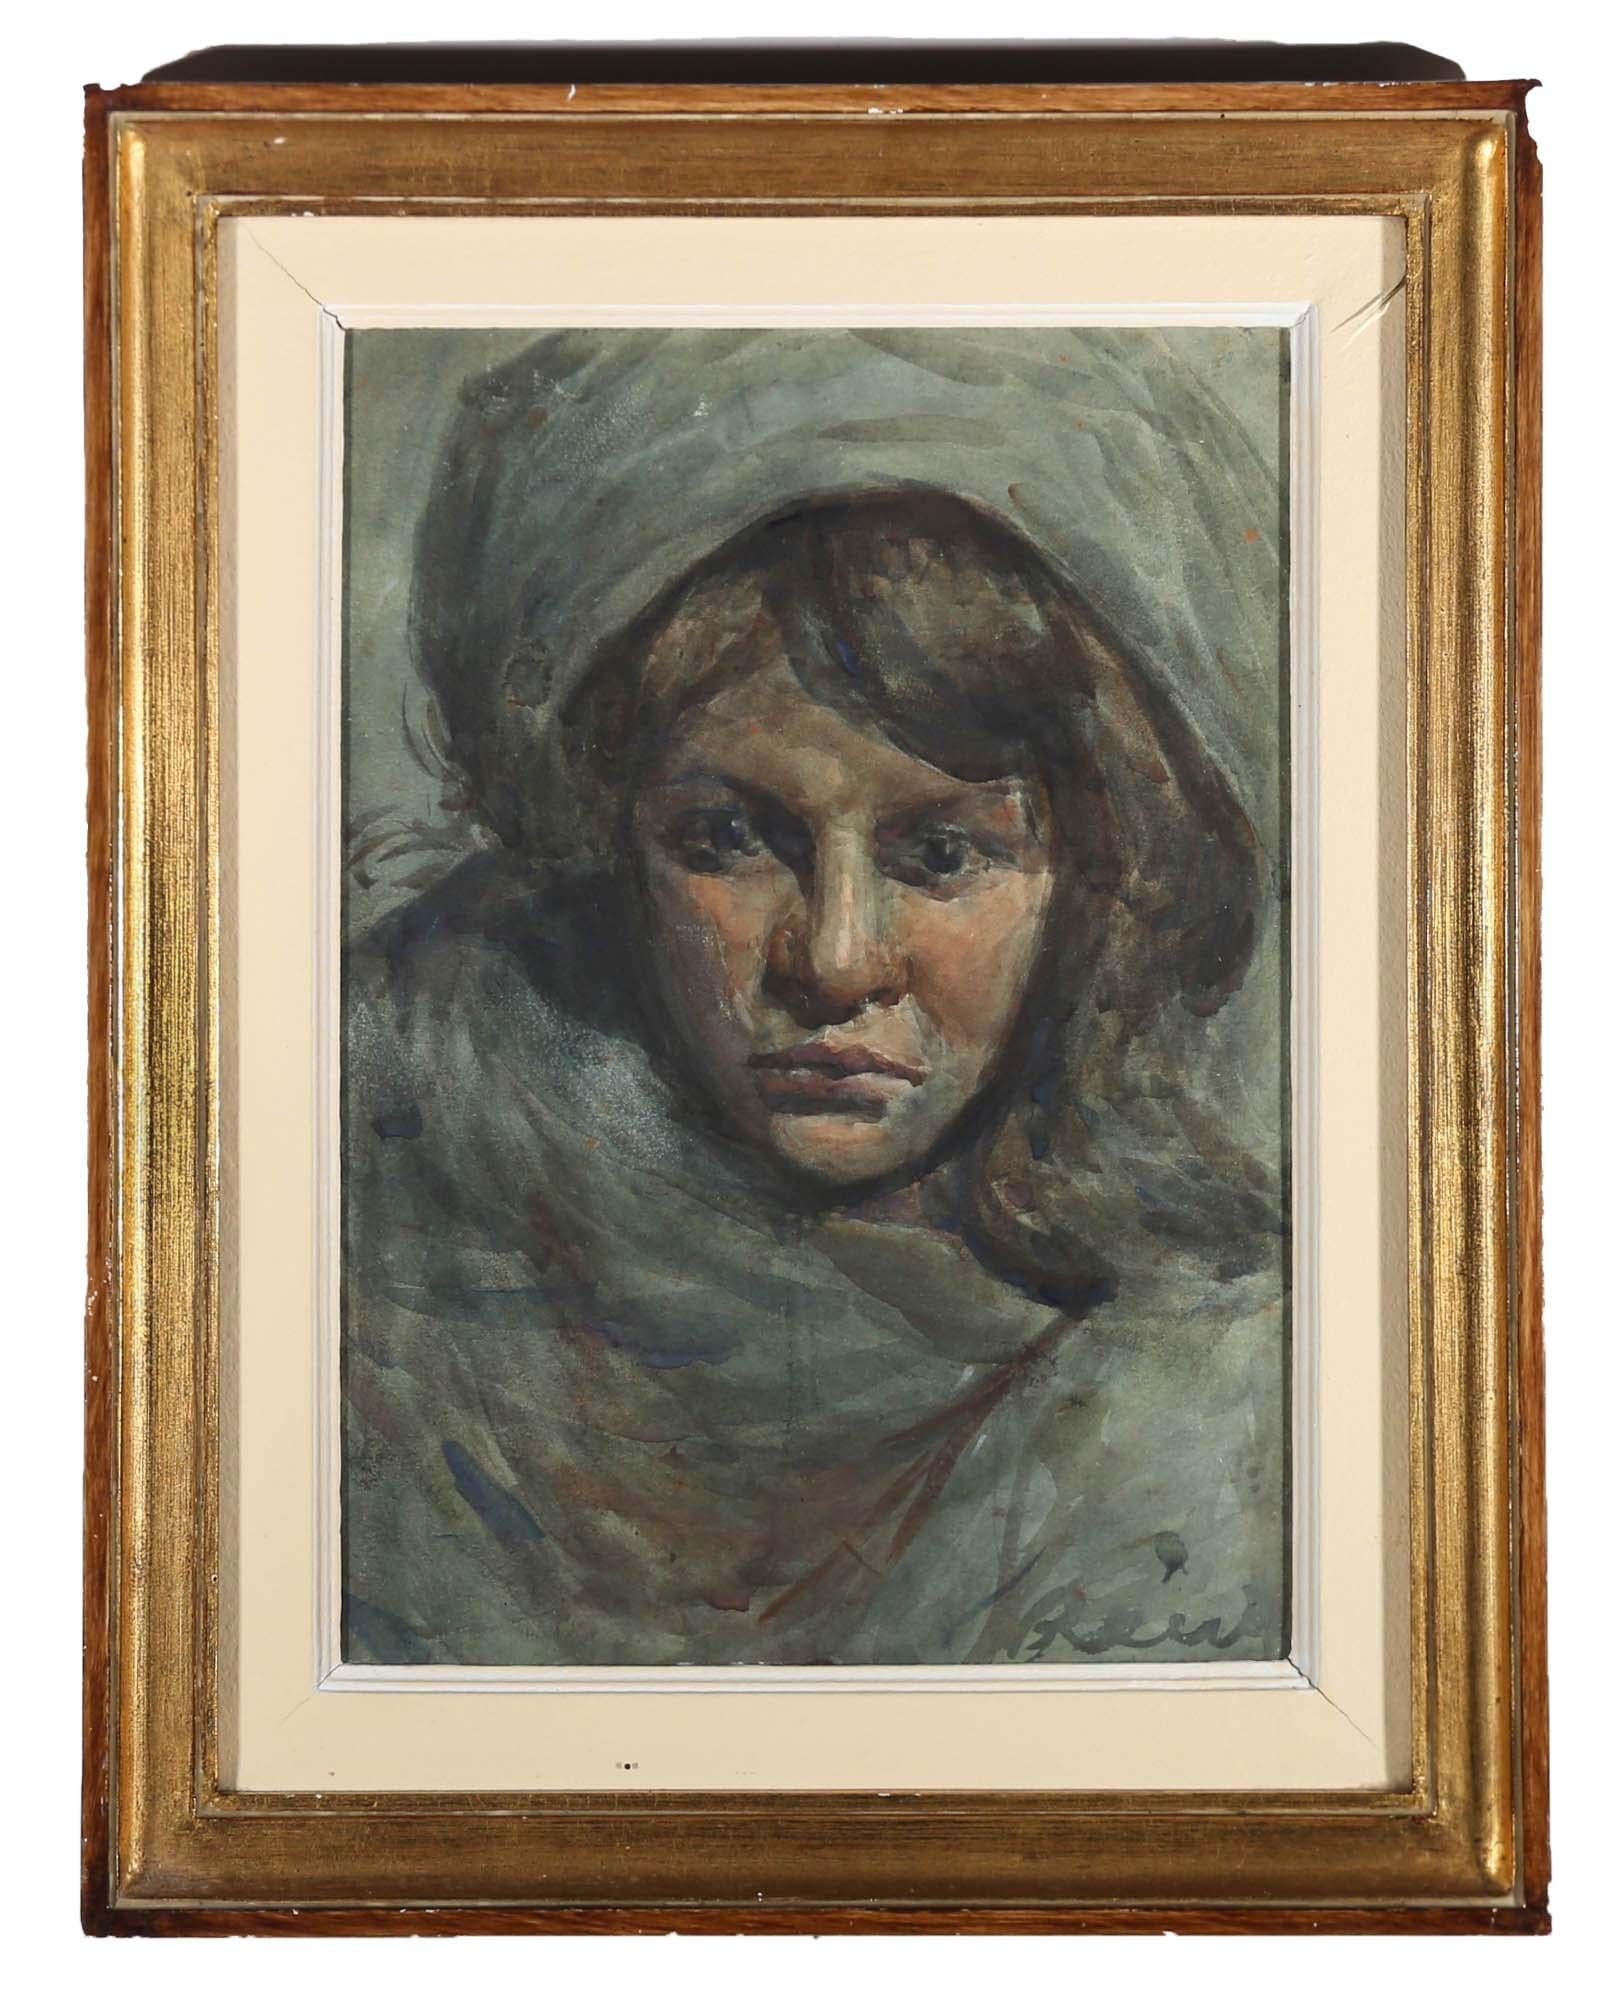 A striking watercolour study depicting a woman draped in blue staring directly at the viewer. Her eyes are piercing and she wears a stony expression in her face. Unsigned. Presented in a rustic gilt frame. On paper.
